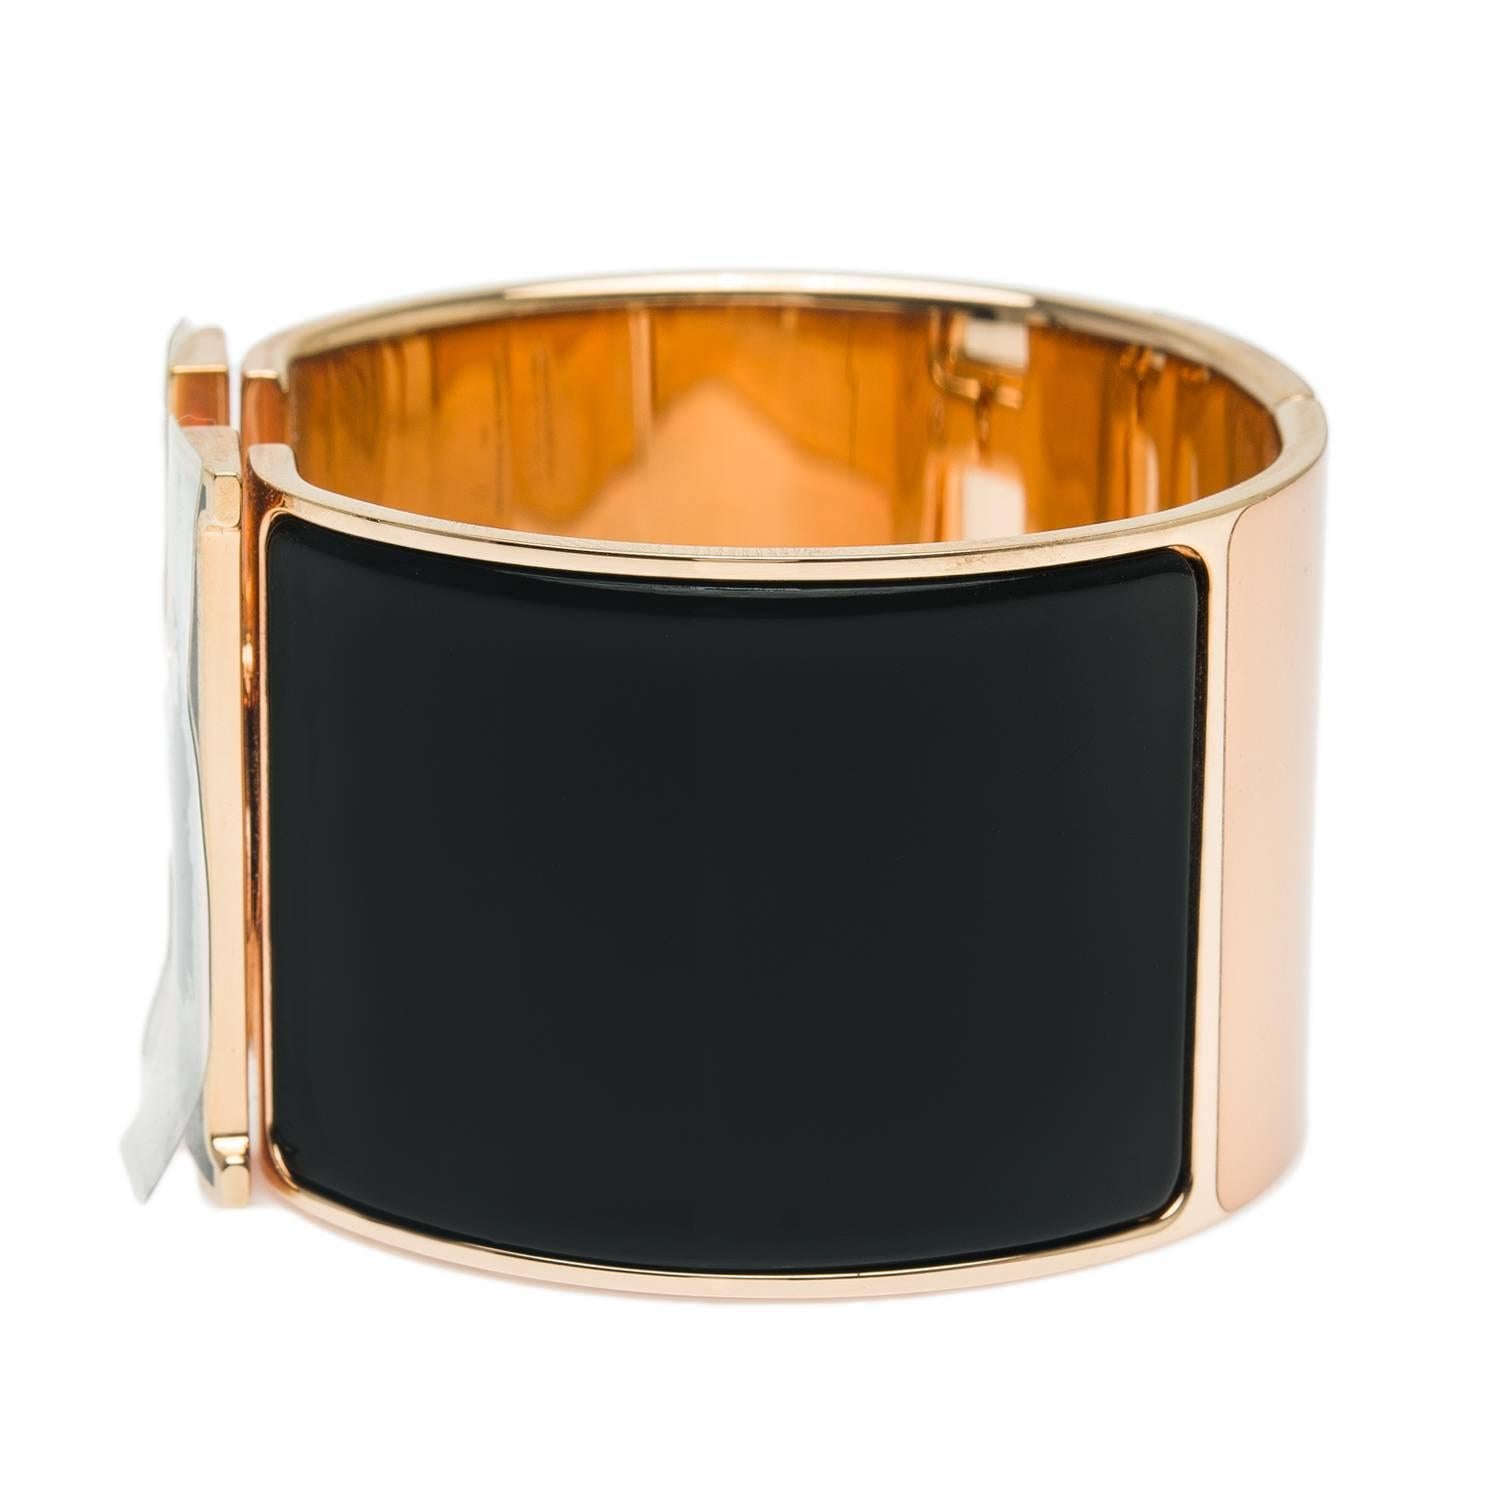 Hermes extra wide black enamel Clic Clac H bracelet with black lacquer H and rose gold plated hardware in size PM.

Origin: France

Condition: Never worn

Accompanied by: Hermes box, Hermes dustbag

Measurements: Diameter: 2.25